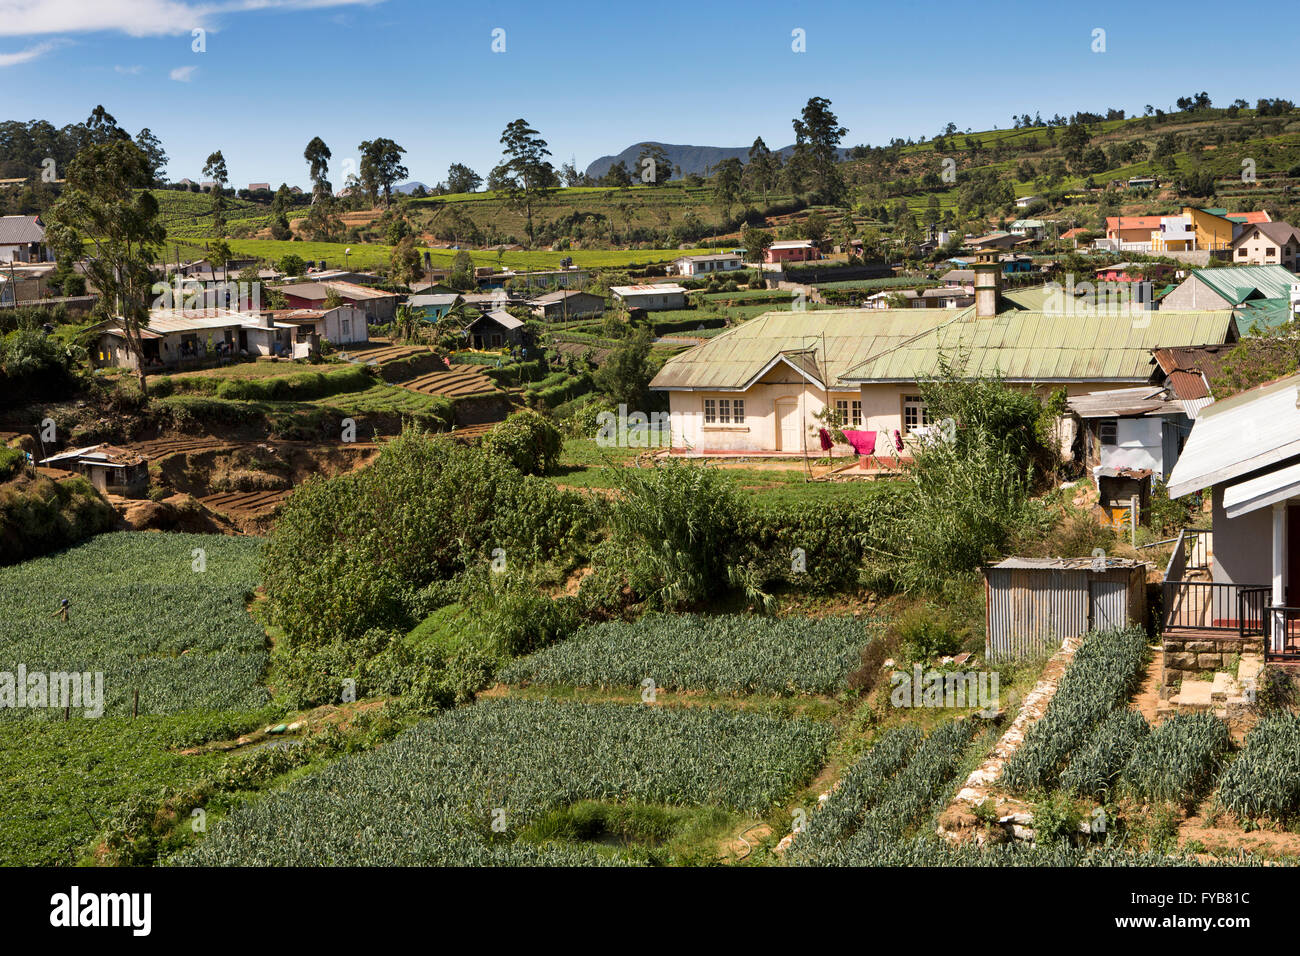 Sri Lanka, Nuwara Eliya, intensely cultivated crops growing on agricultural land Stock Photo